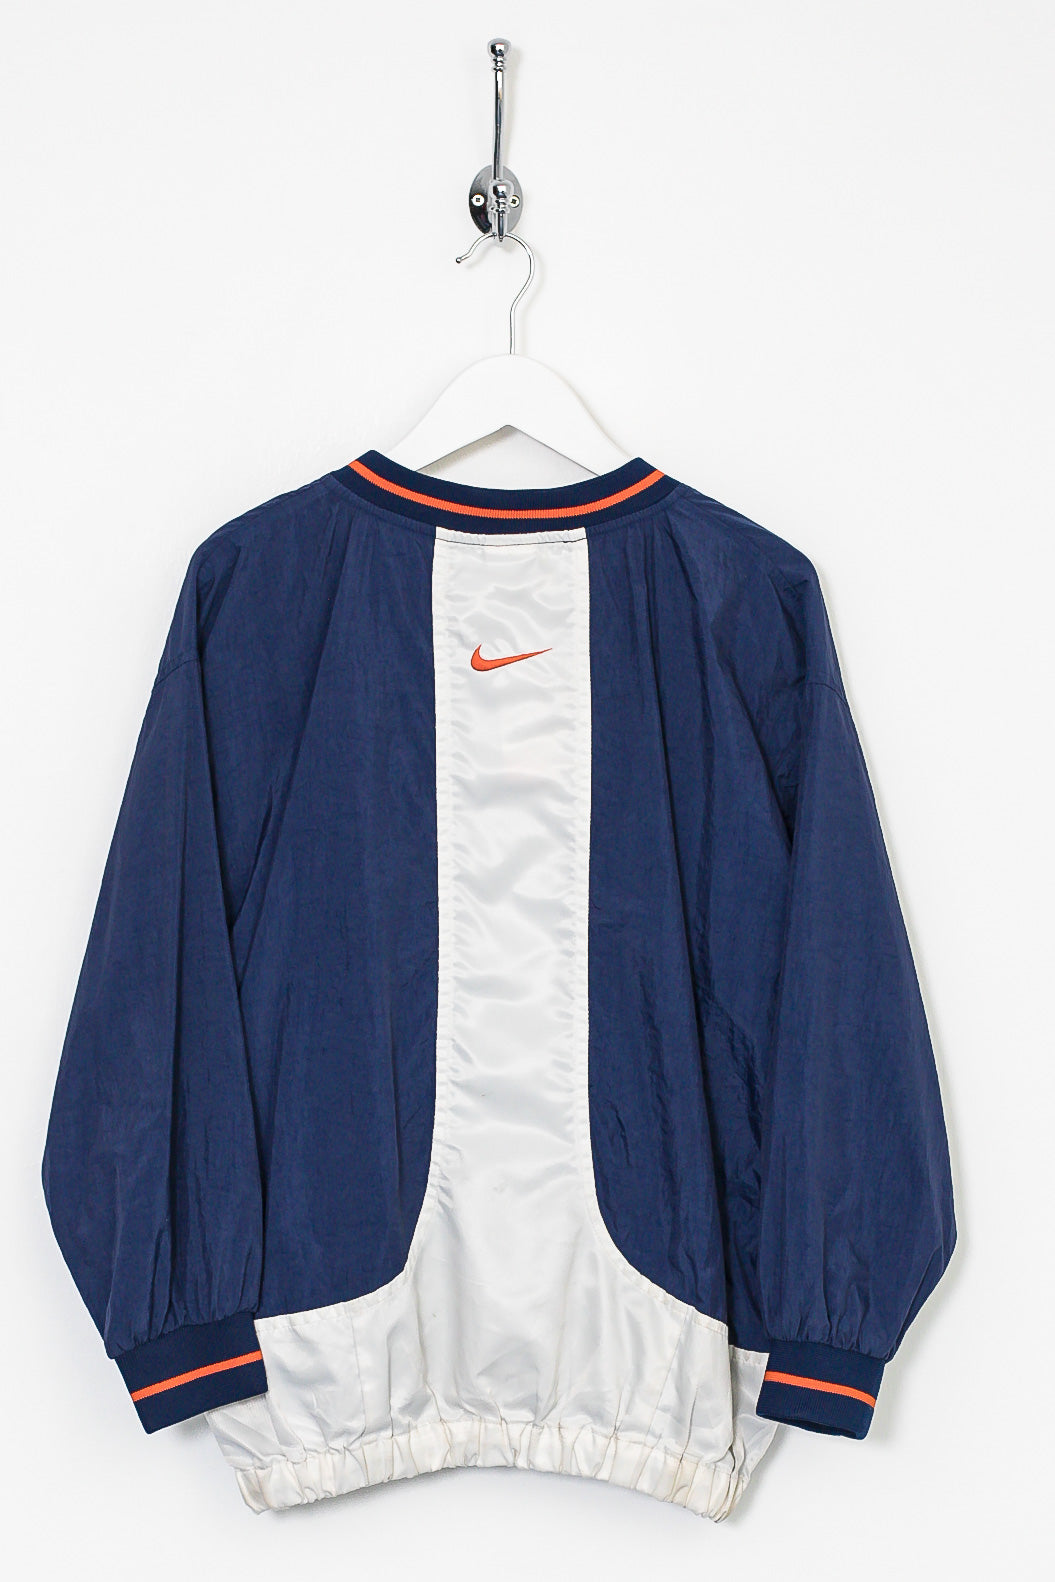 Womens 90s Nike Pullover (M)